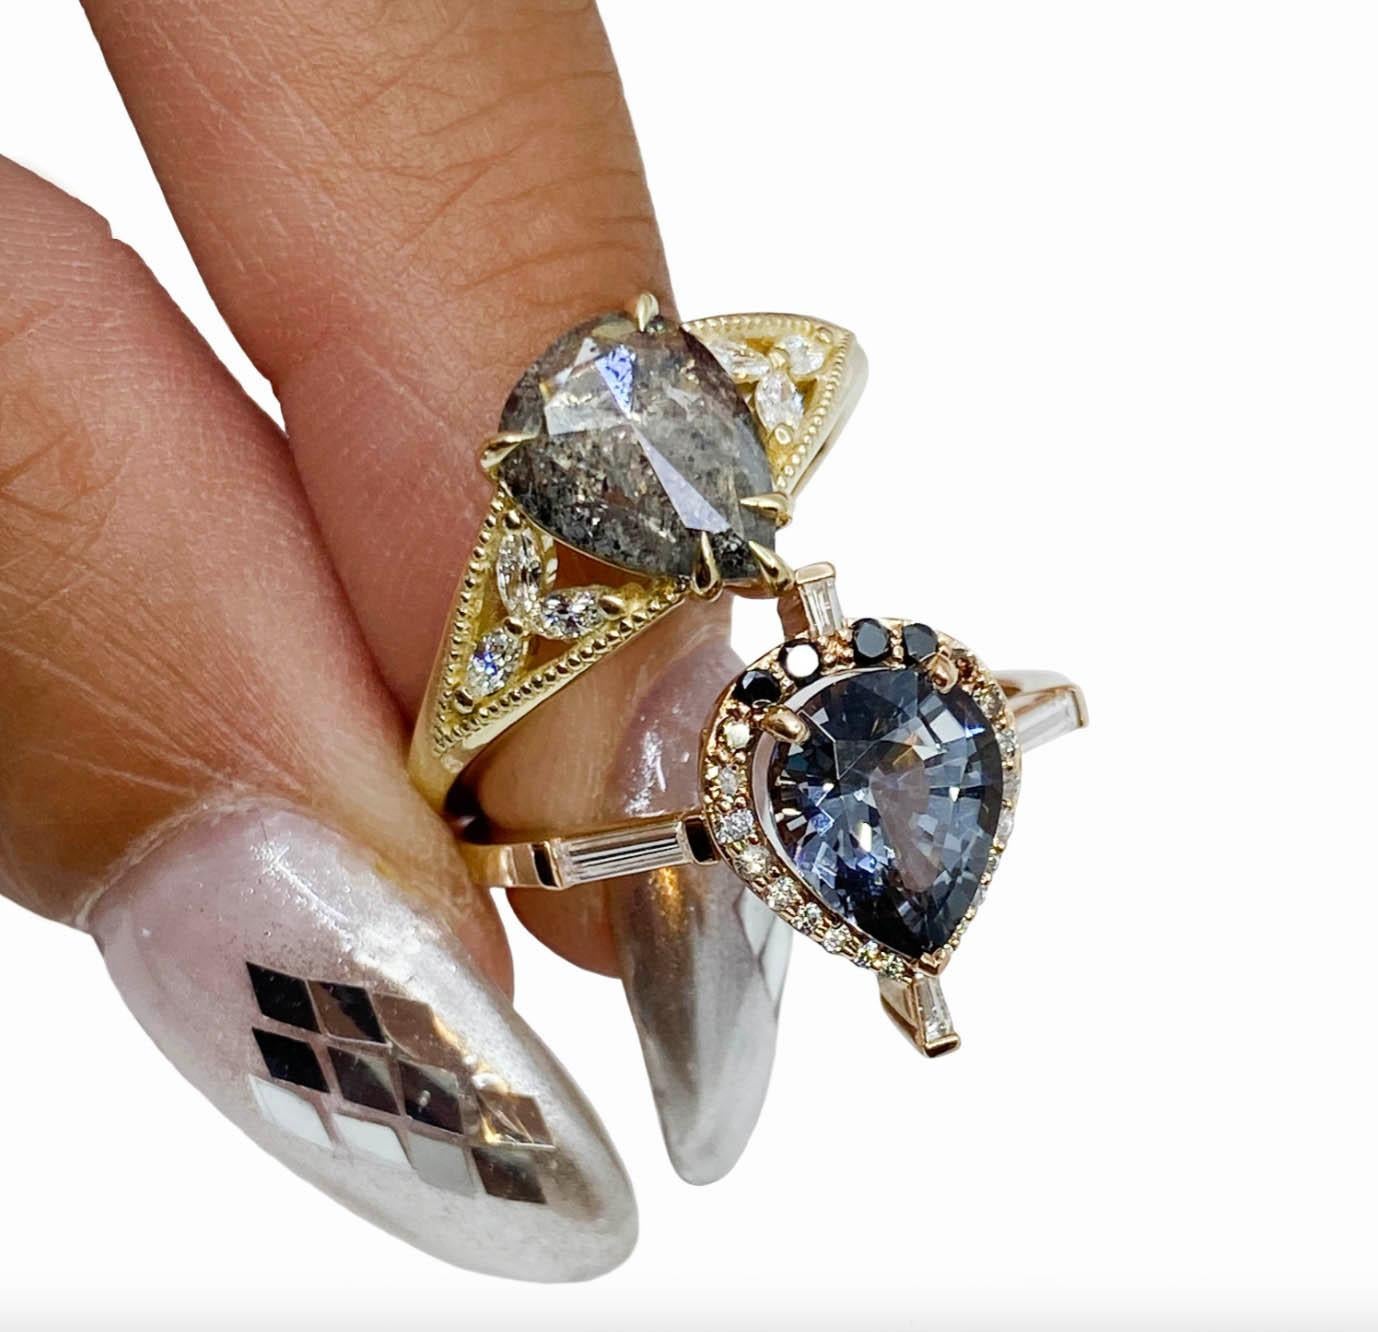 An ombre cascade of diamonds surrounds a pear shape Thai grey spinel, set in 14k rose gold. 

Materials: 14K Rose Gold + 1.5ct pear spinel with approximately .33ctw melee diamonds in champagne, black, and white. 

Size: 7